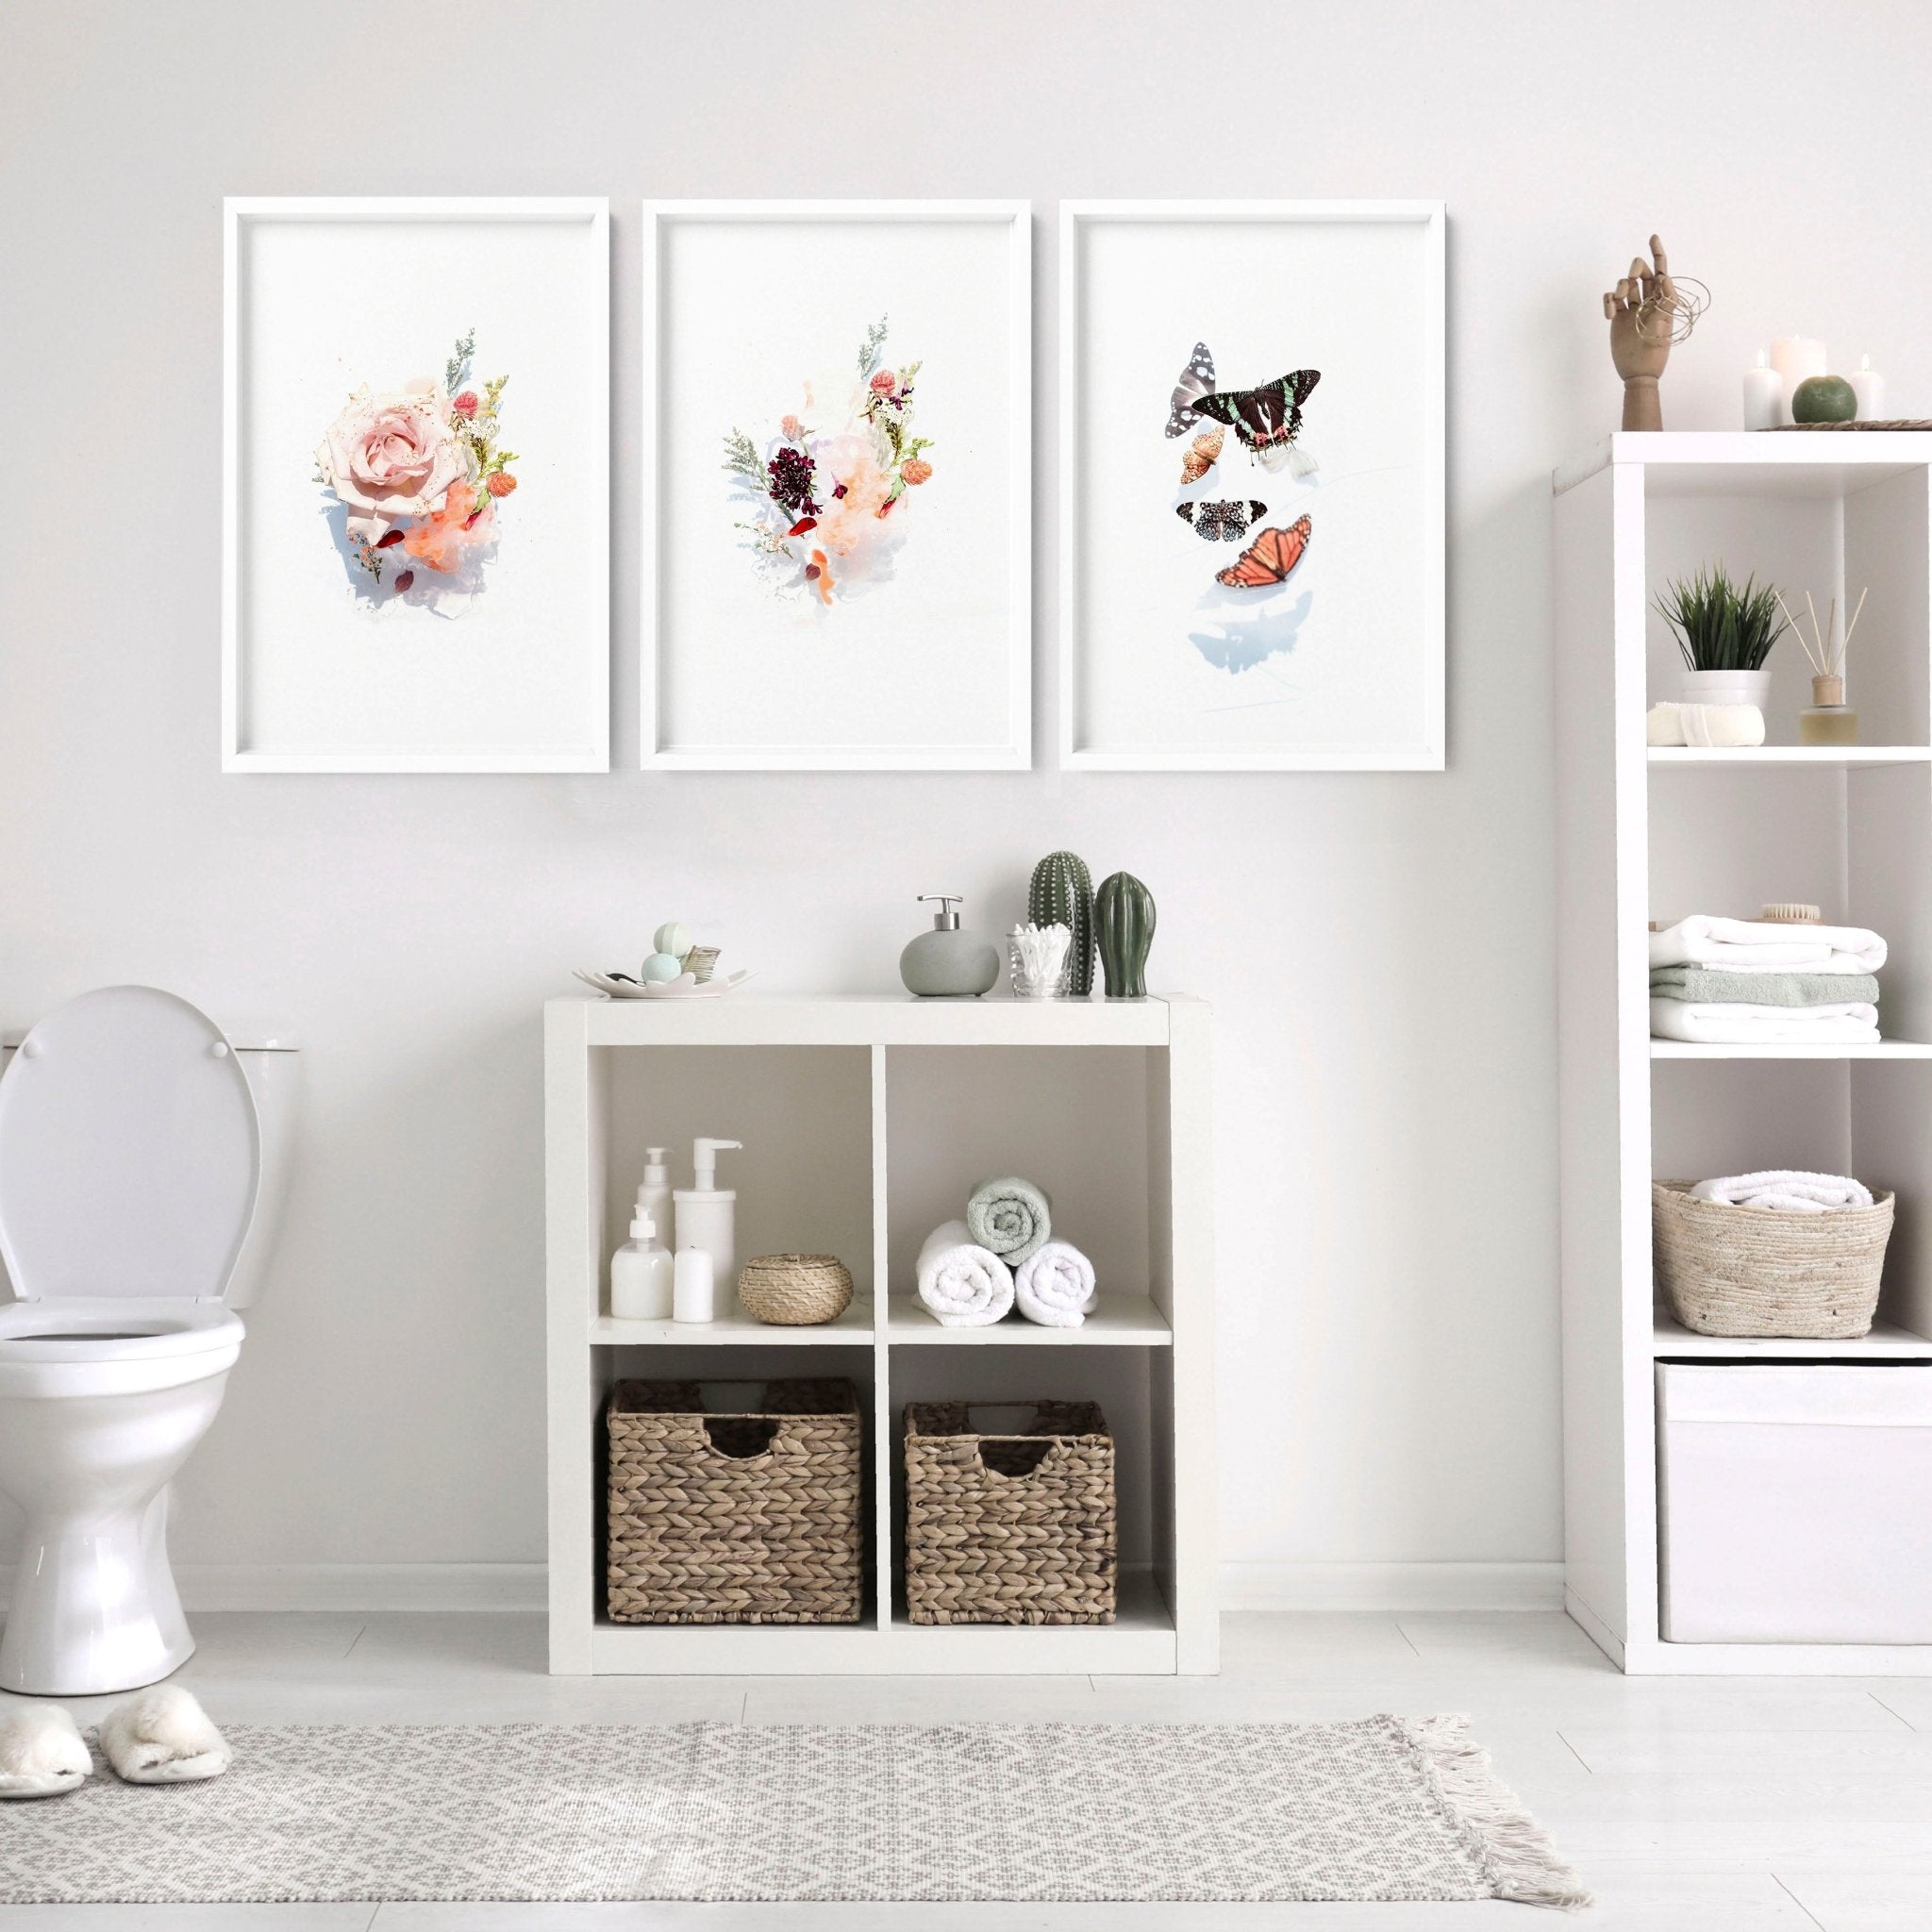 Shabby chic framed pictures bathroom | Set of 3 wall art prints